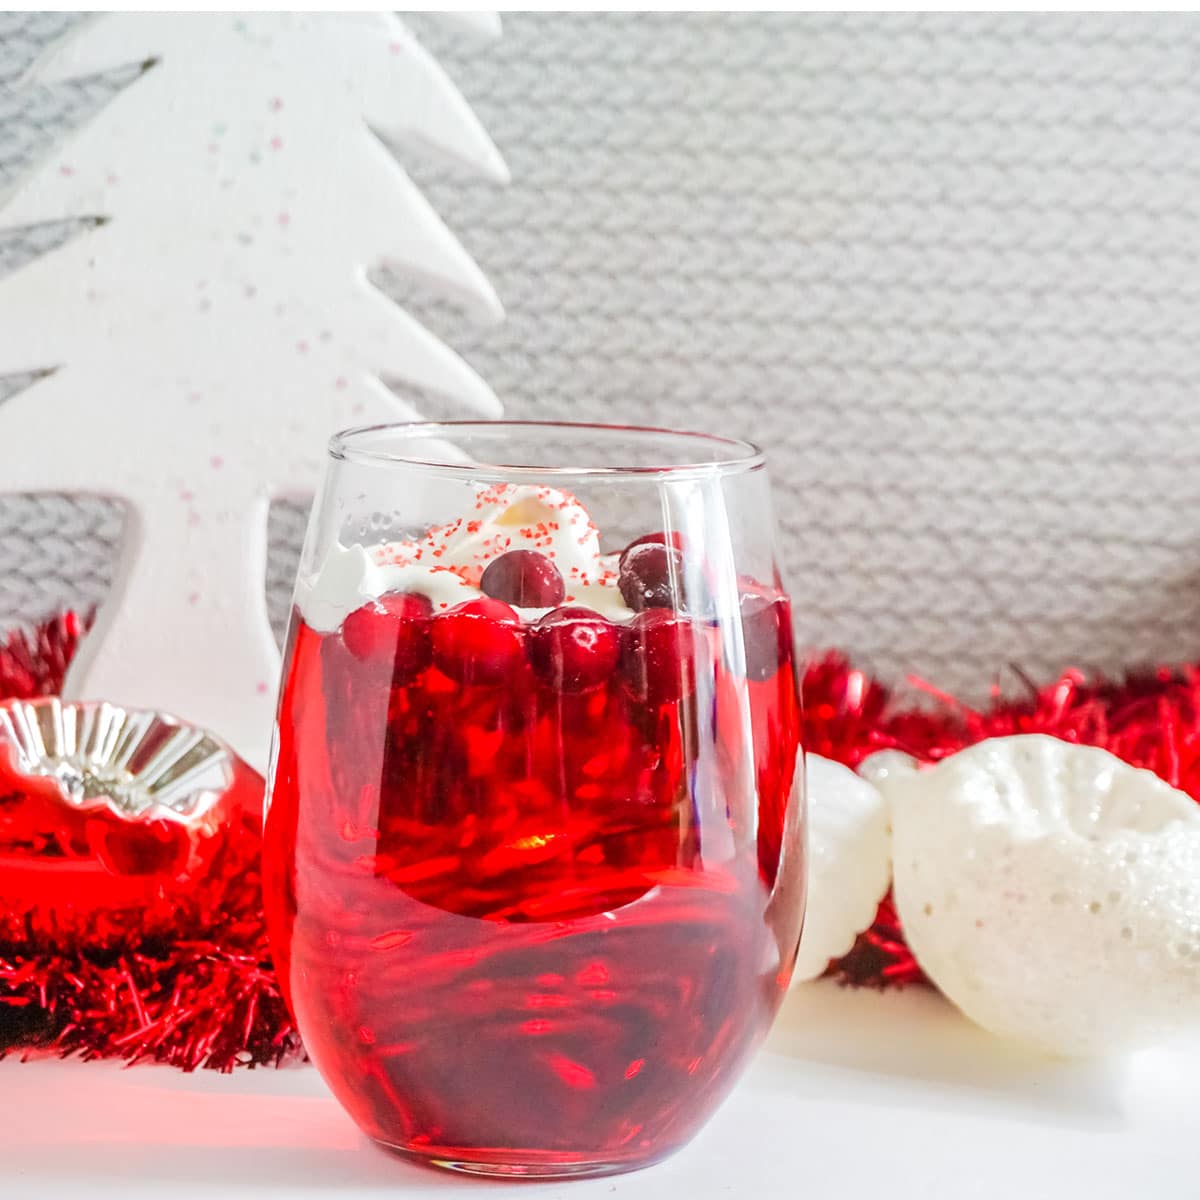 A Punch for all ages, Christmas Season and Cranberry Lovers.